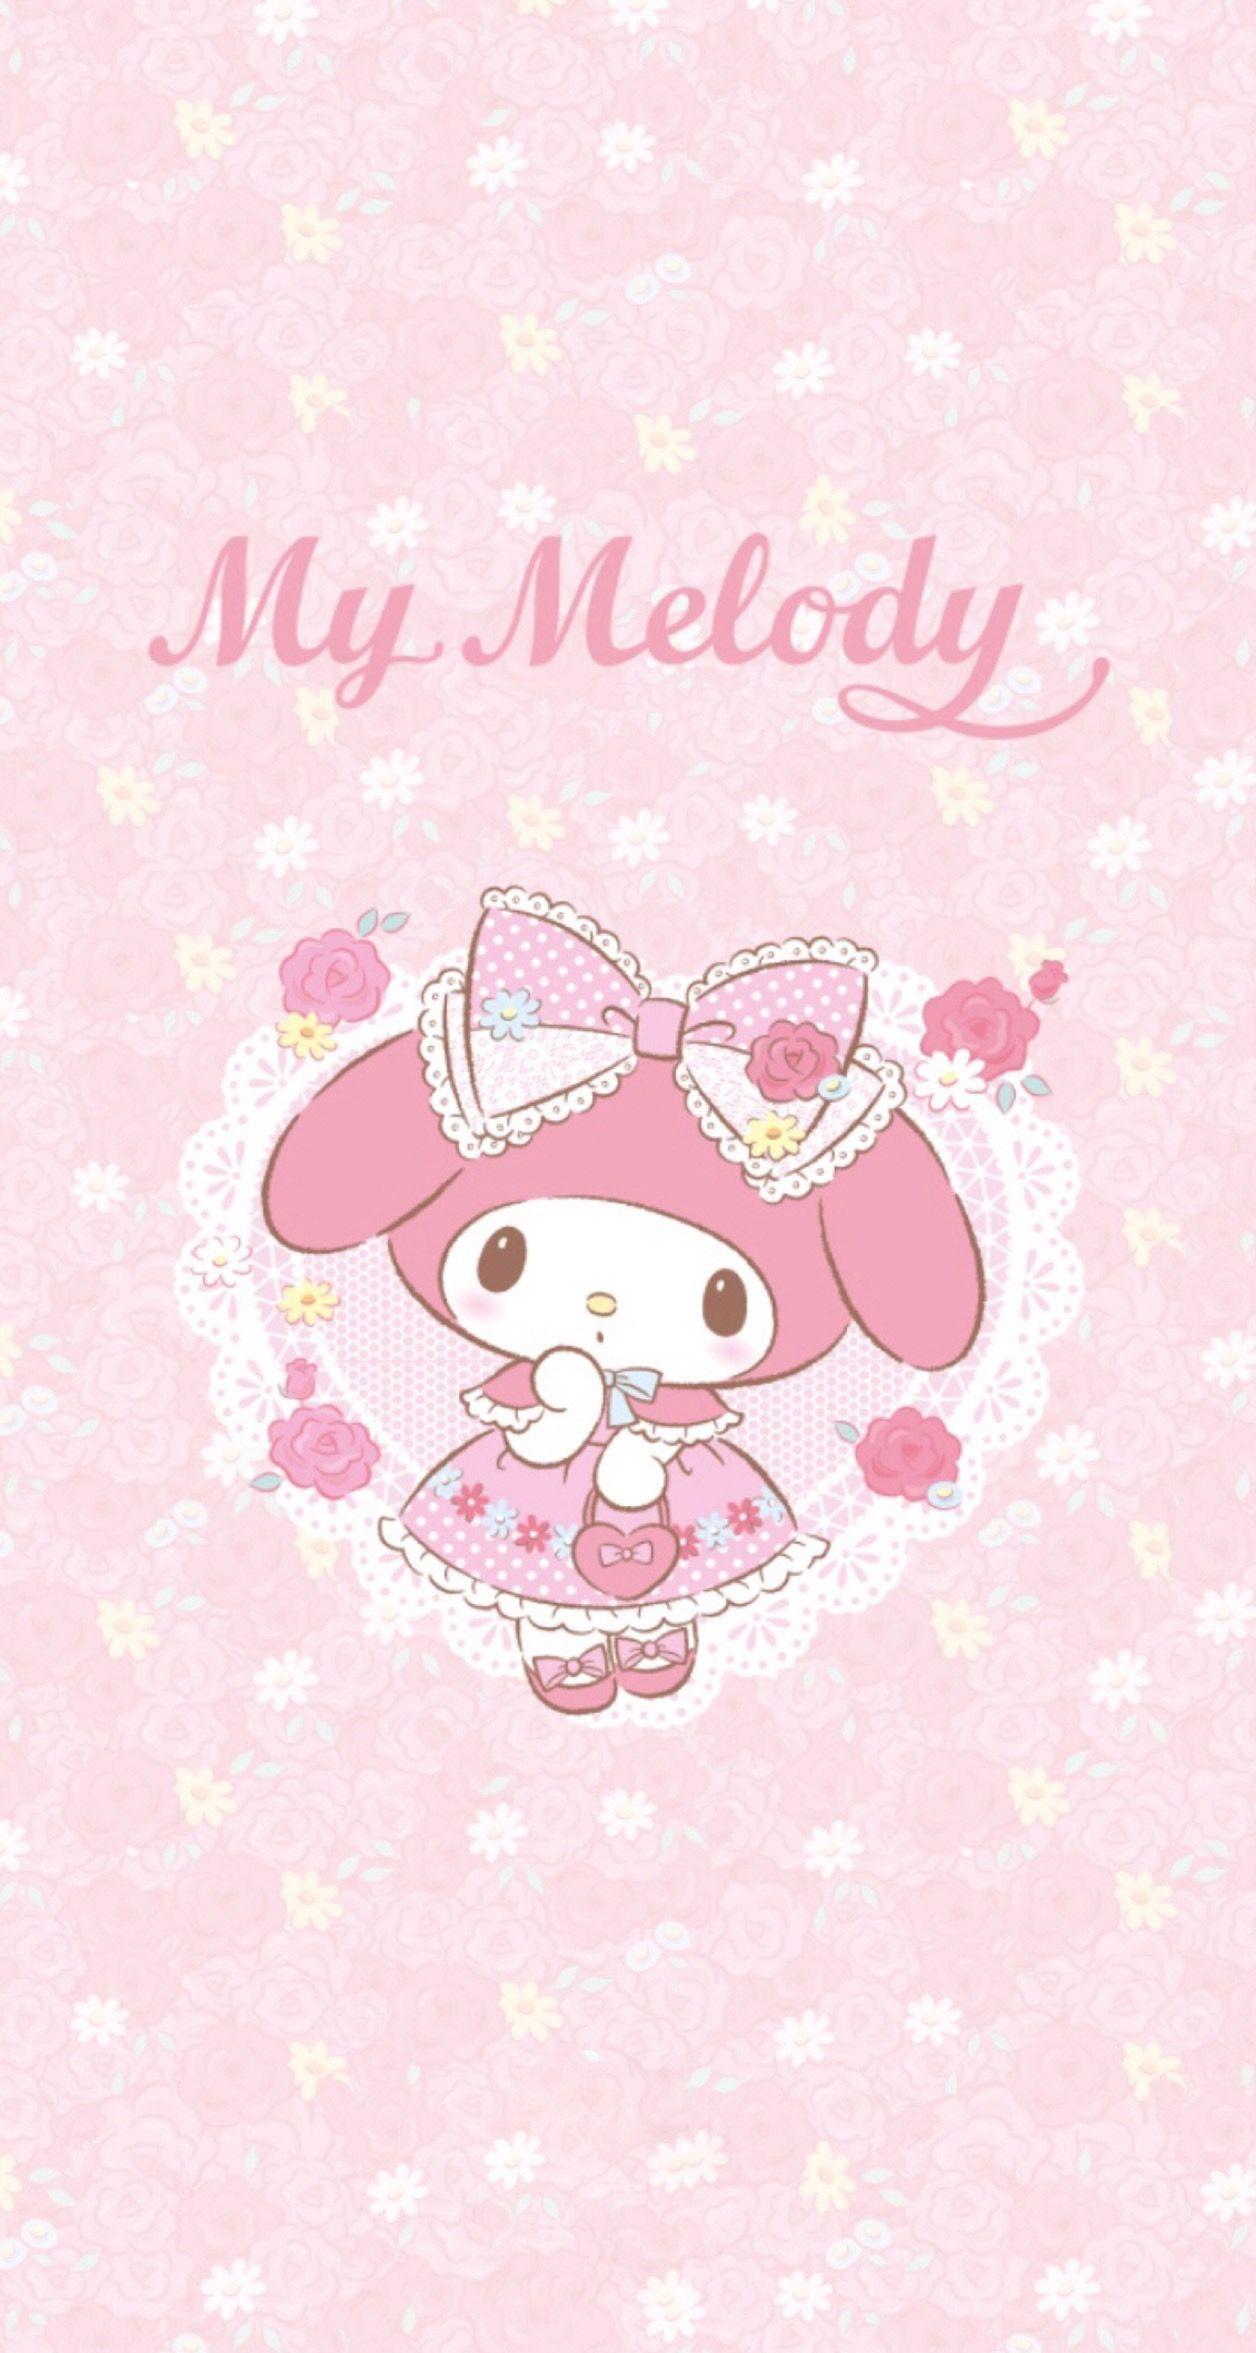 My melody wallpaper iphone 5